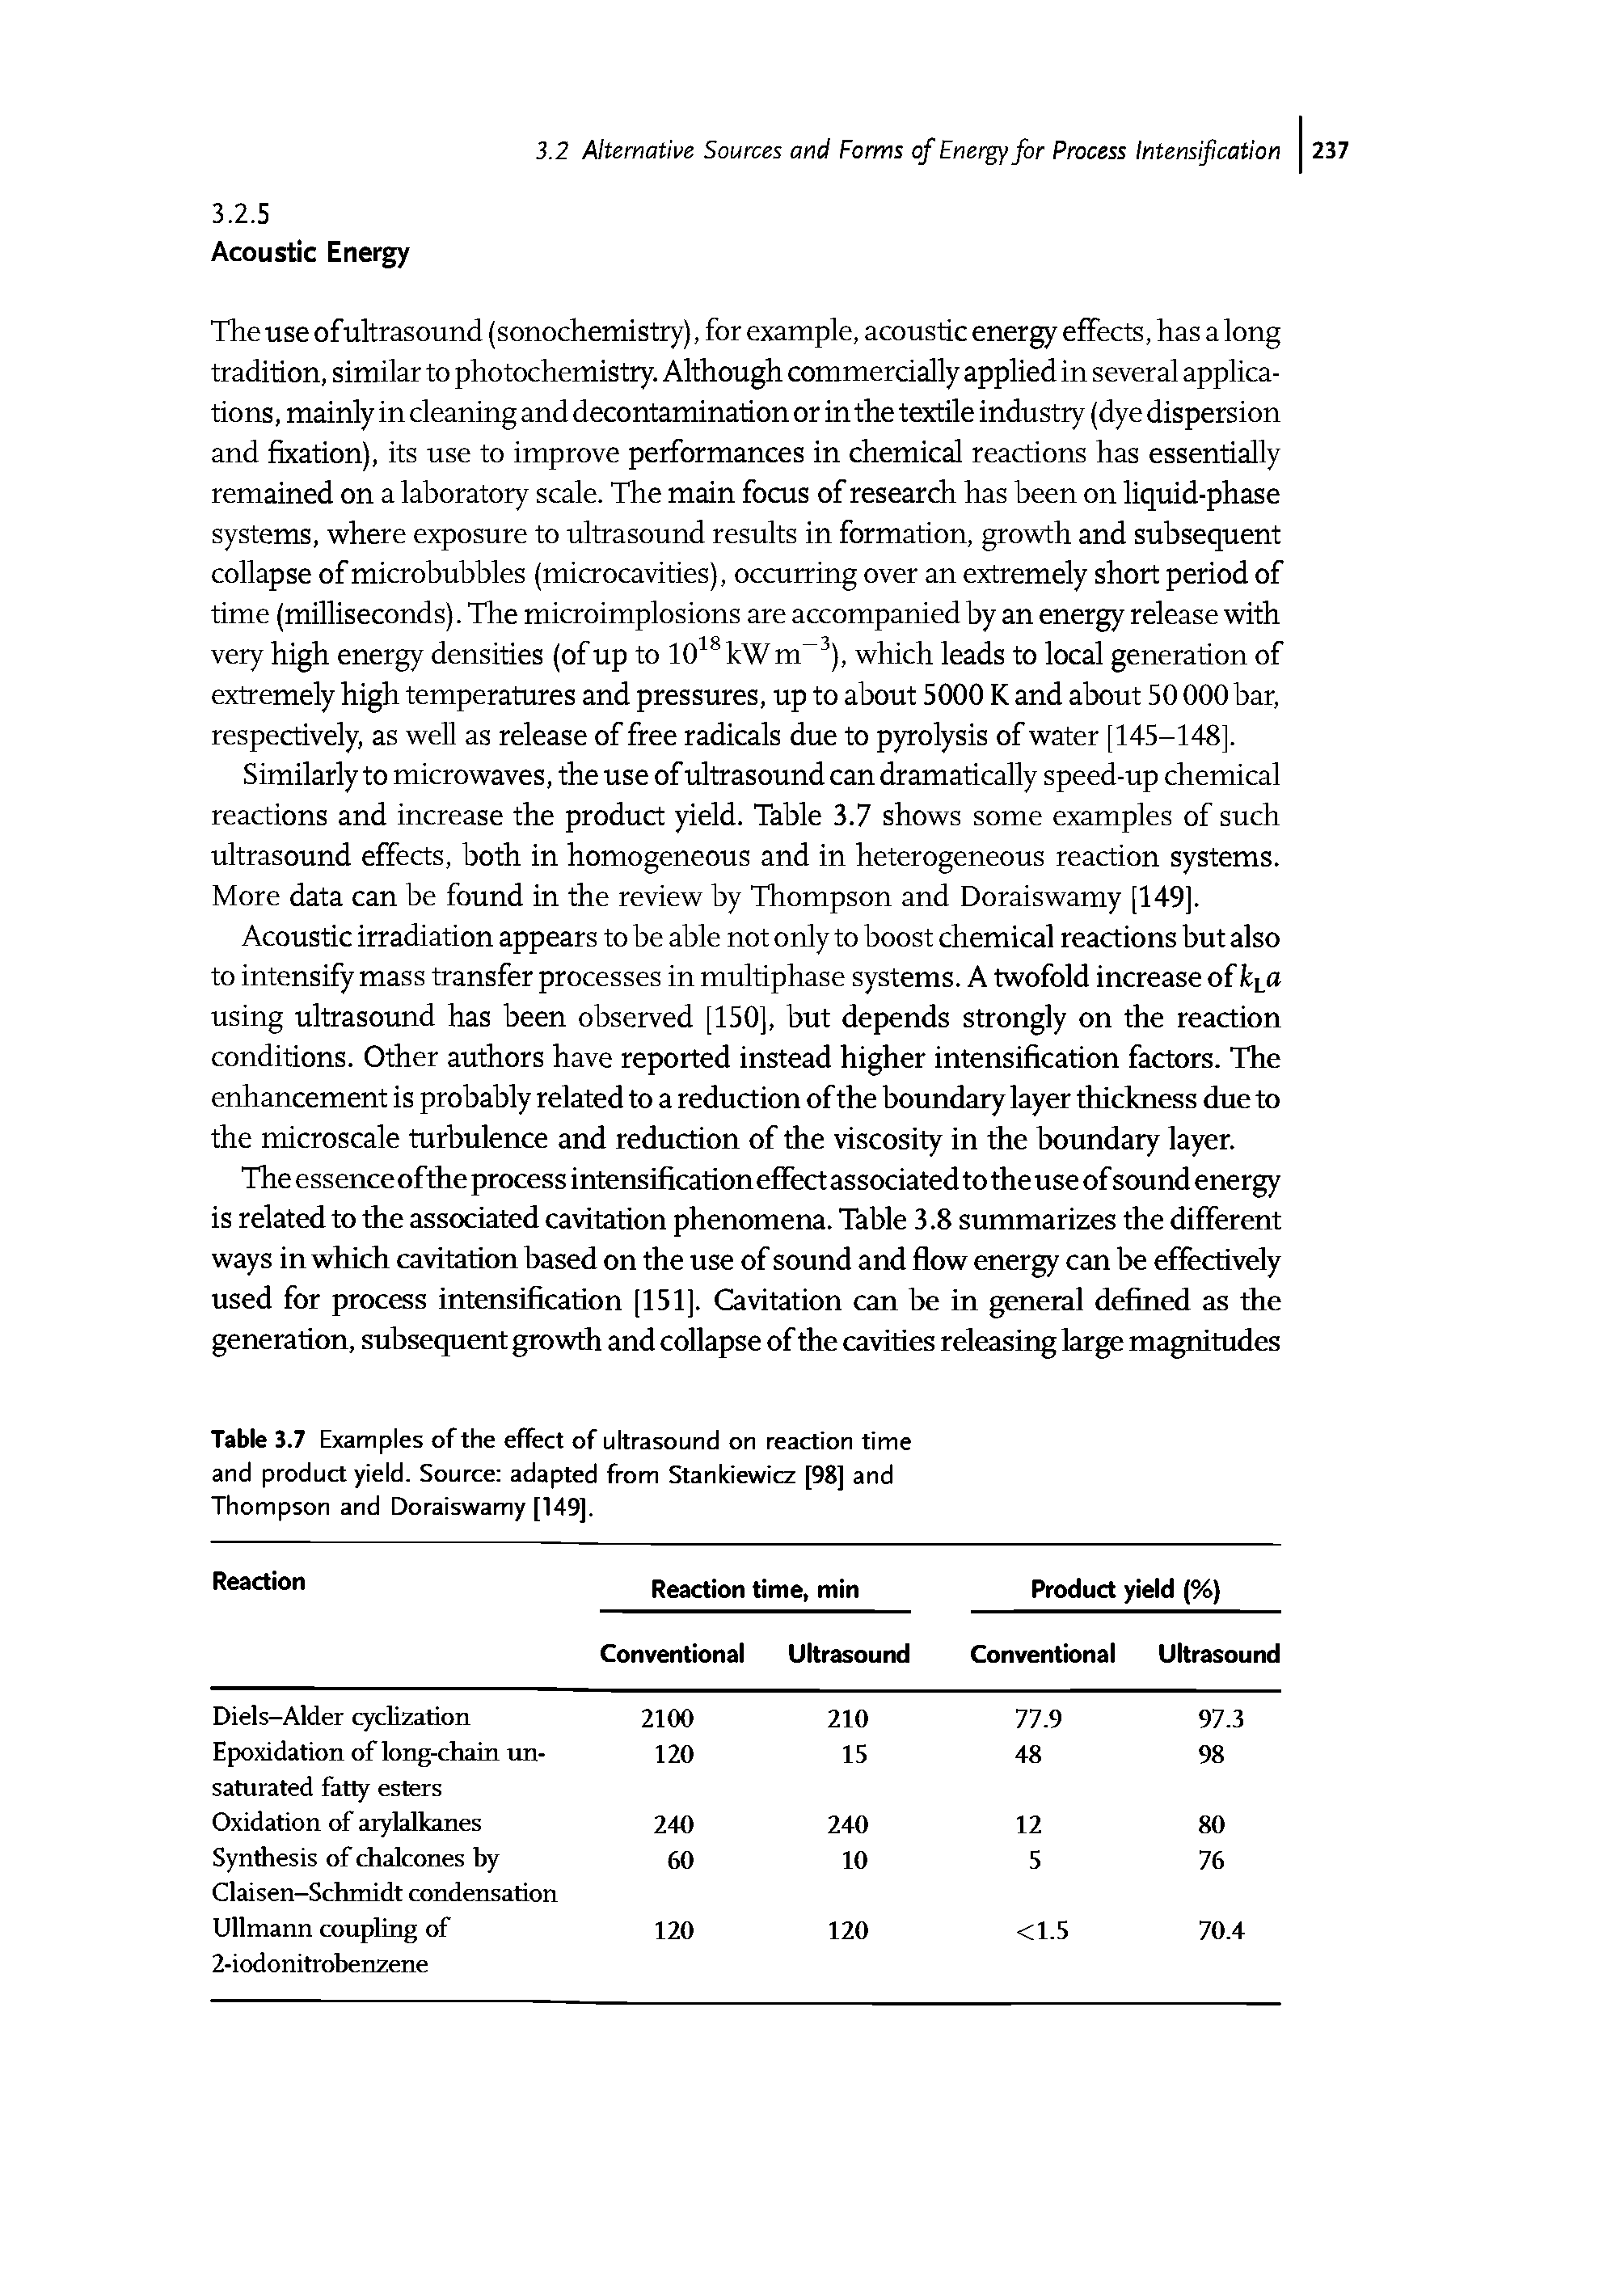 Table 3.7 Examples of the effect of ultrasound on reaction time and product yield. Source adapted from Stankiewicz [98] and Thompson and Doraiswamy [149].